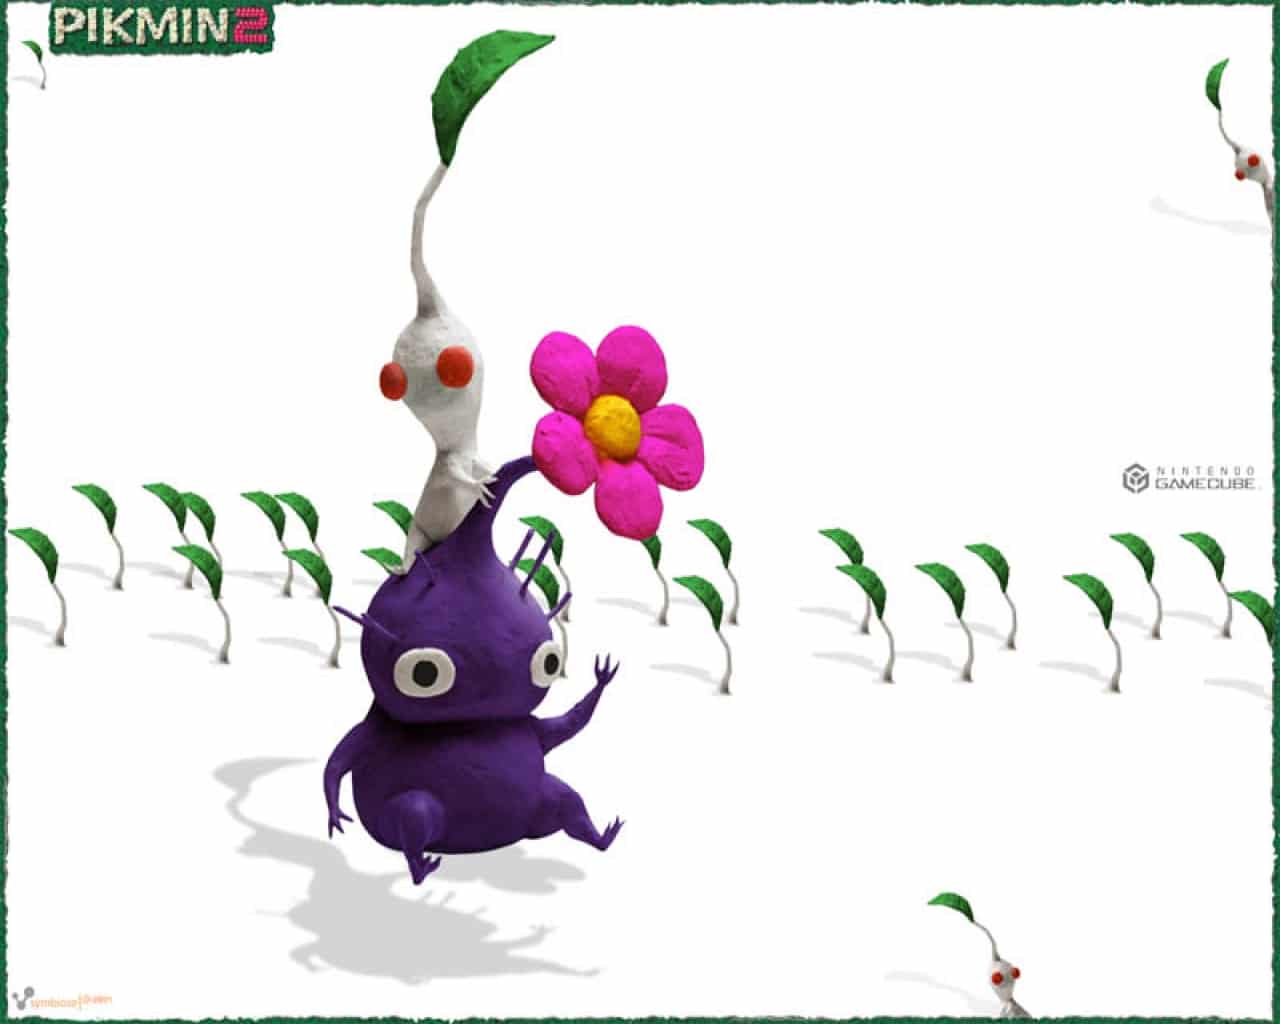 Pikmin 2 Purple and White Pikmin Wallpaper